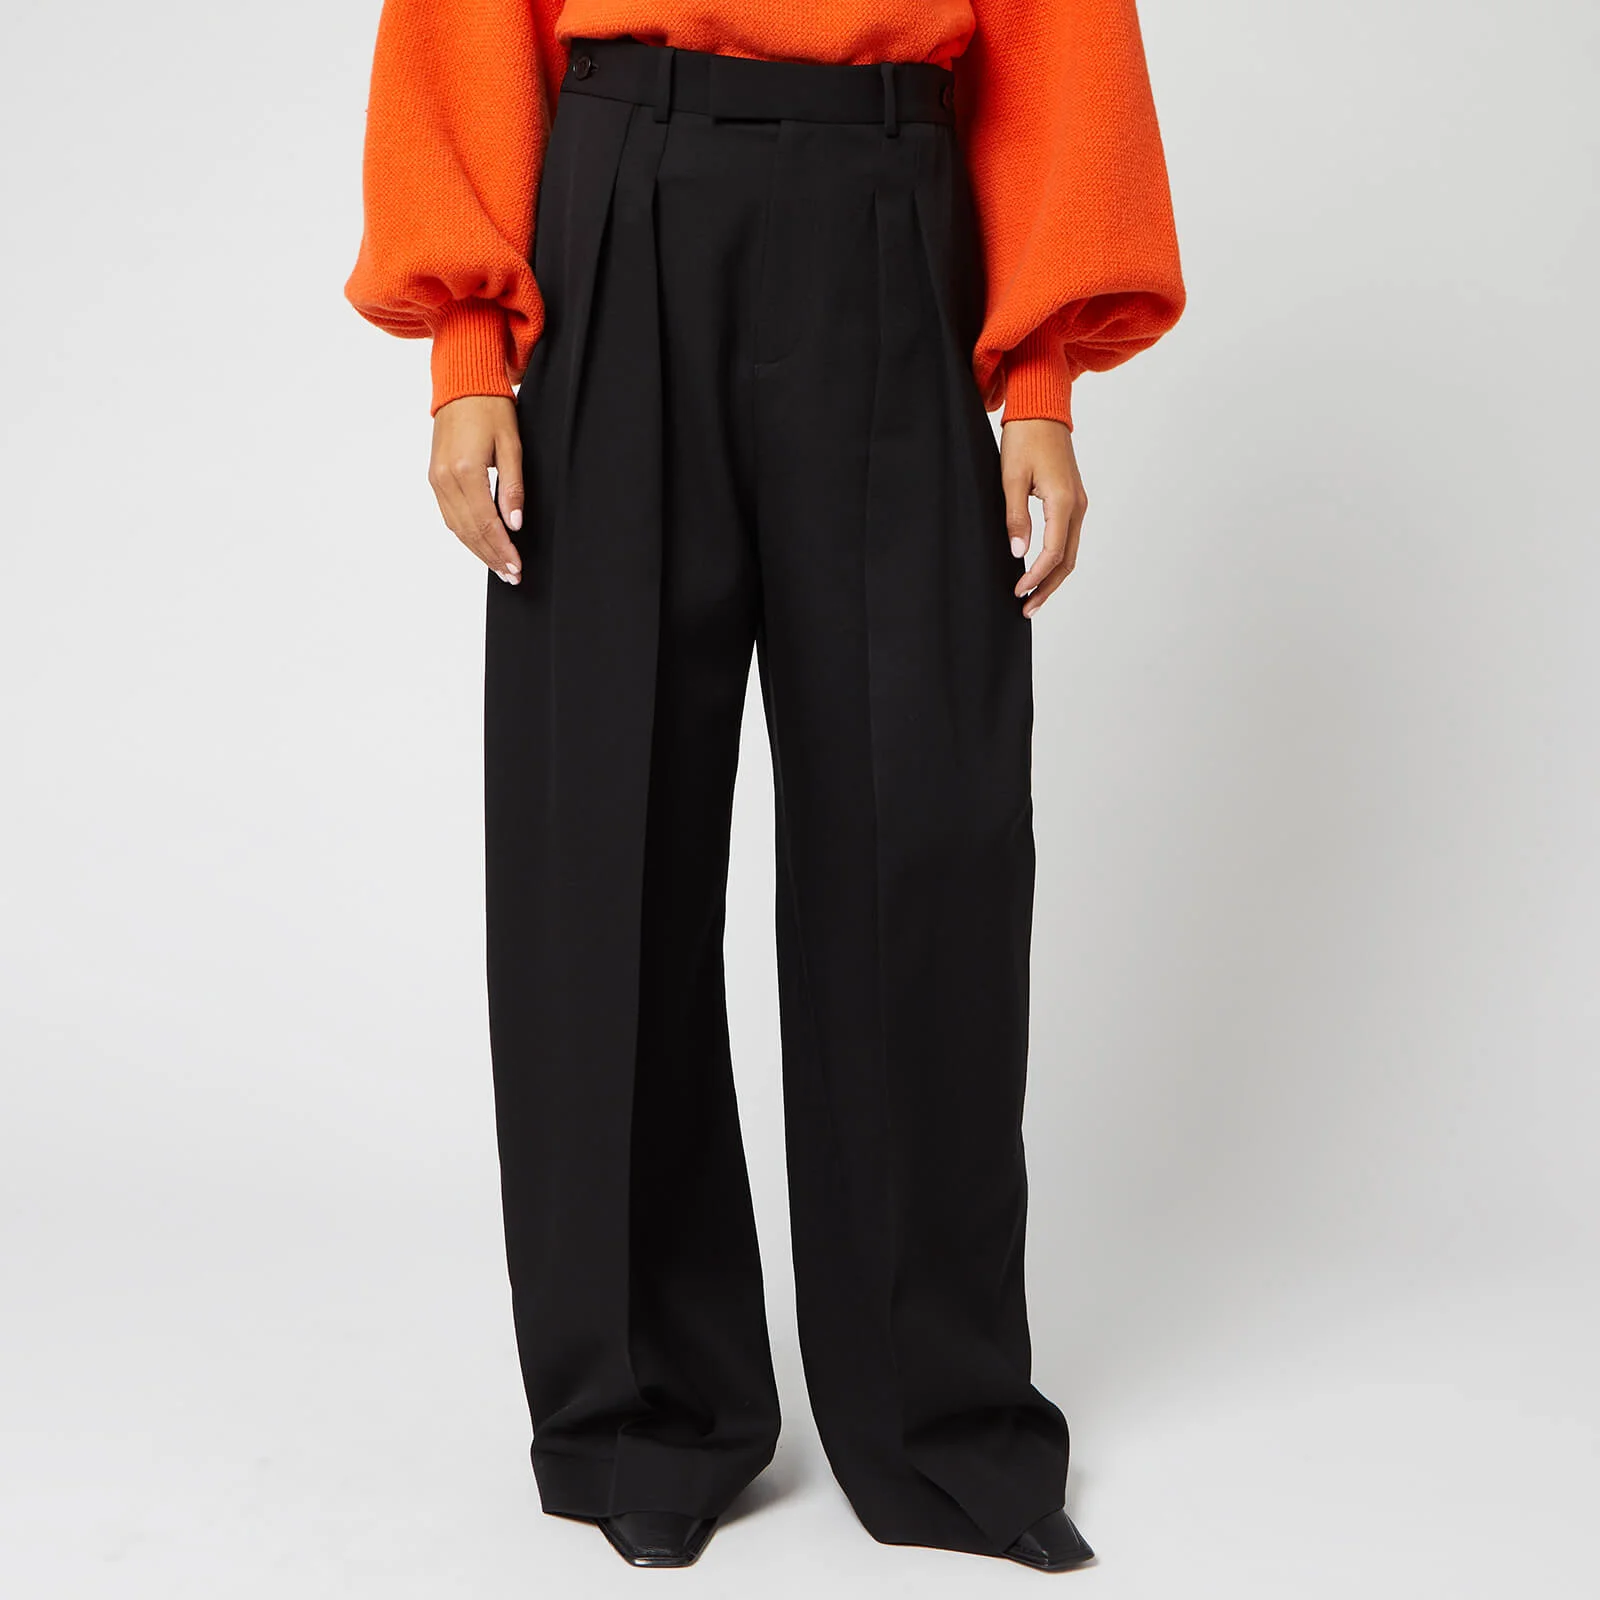 JW Anderson Women's High Waisted Wide Leg Trousers - Black Image 1